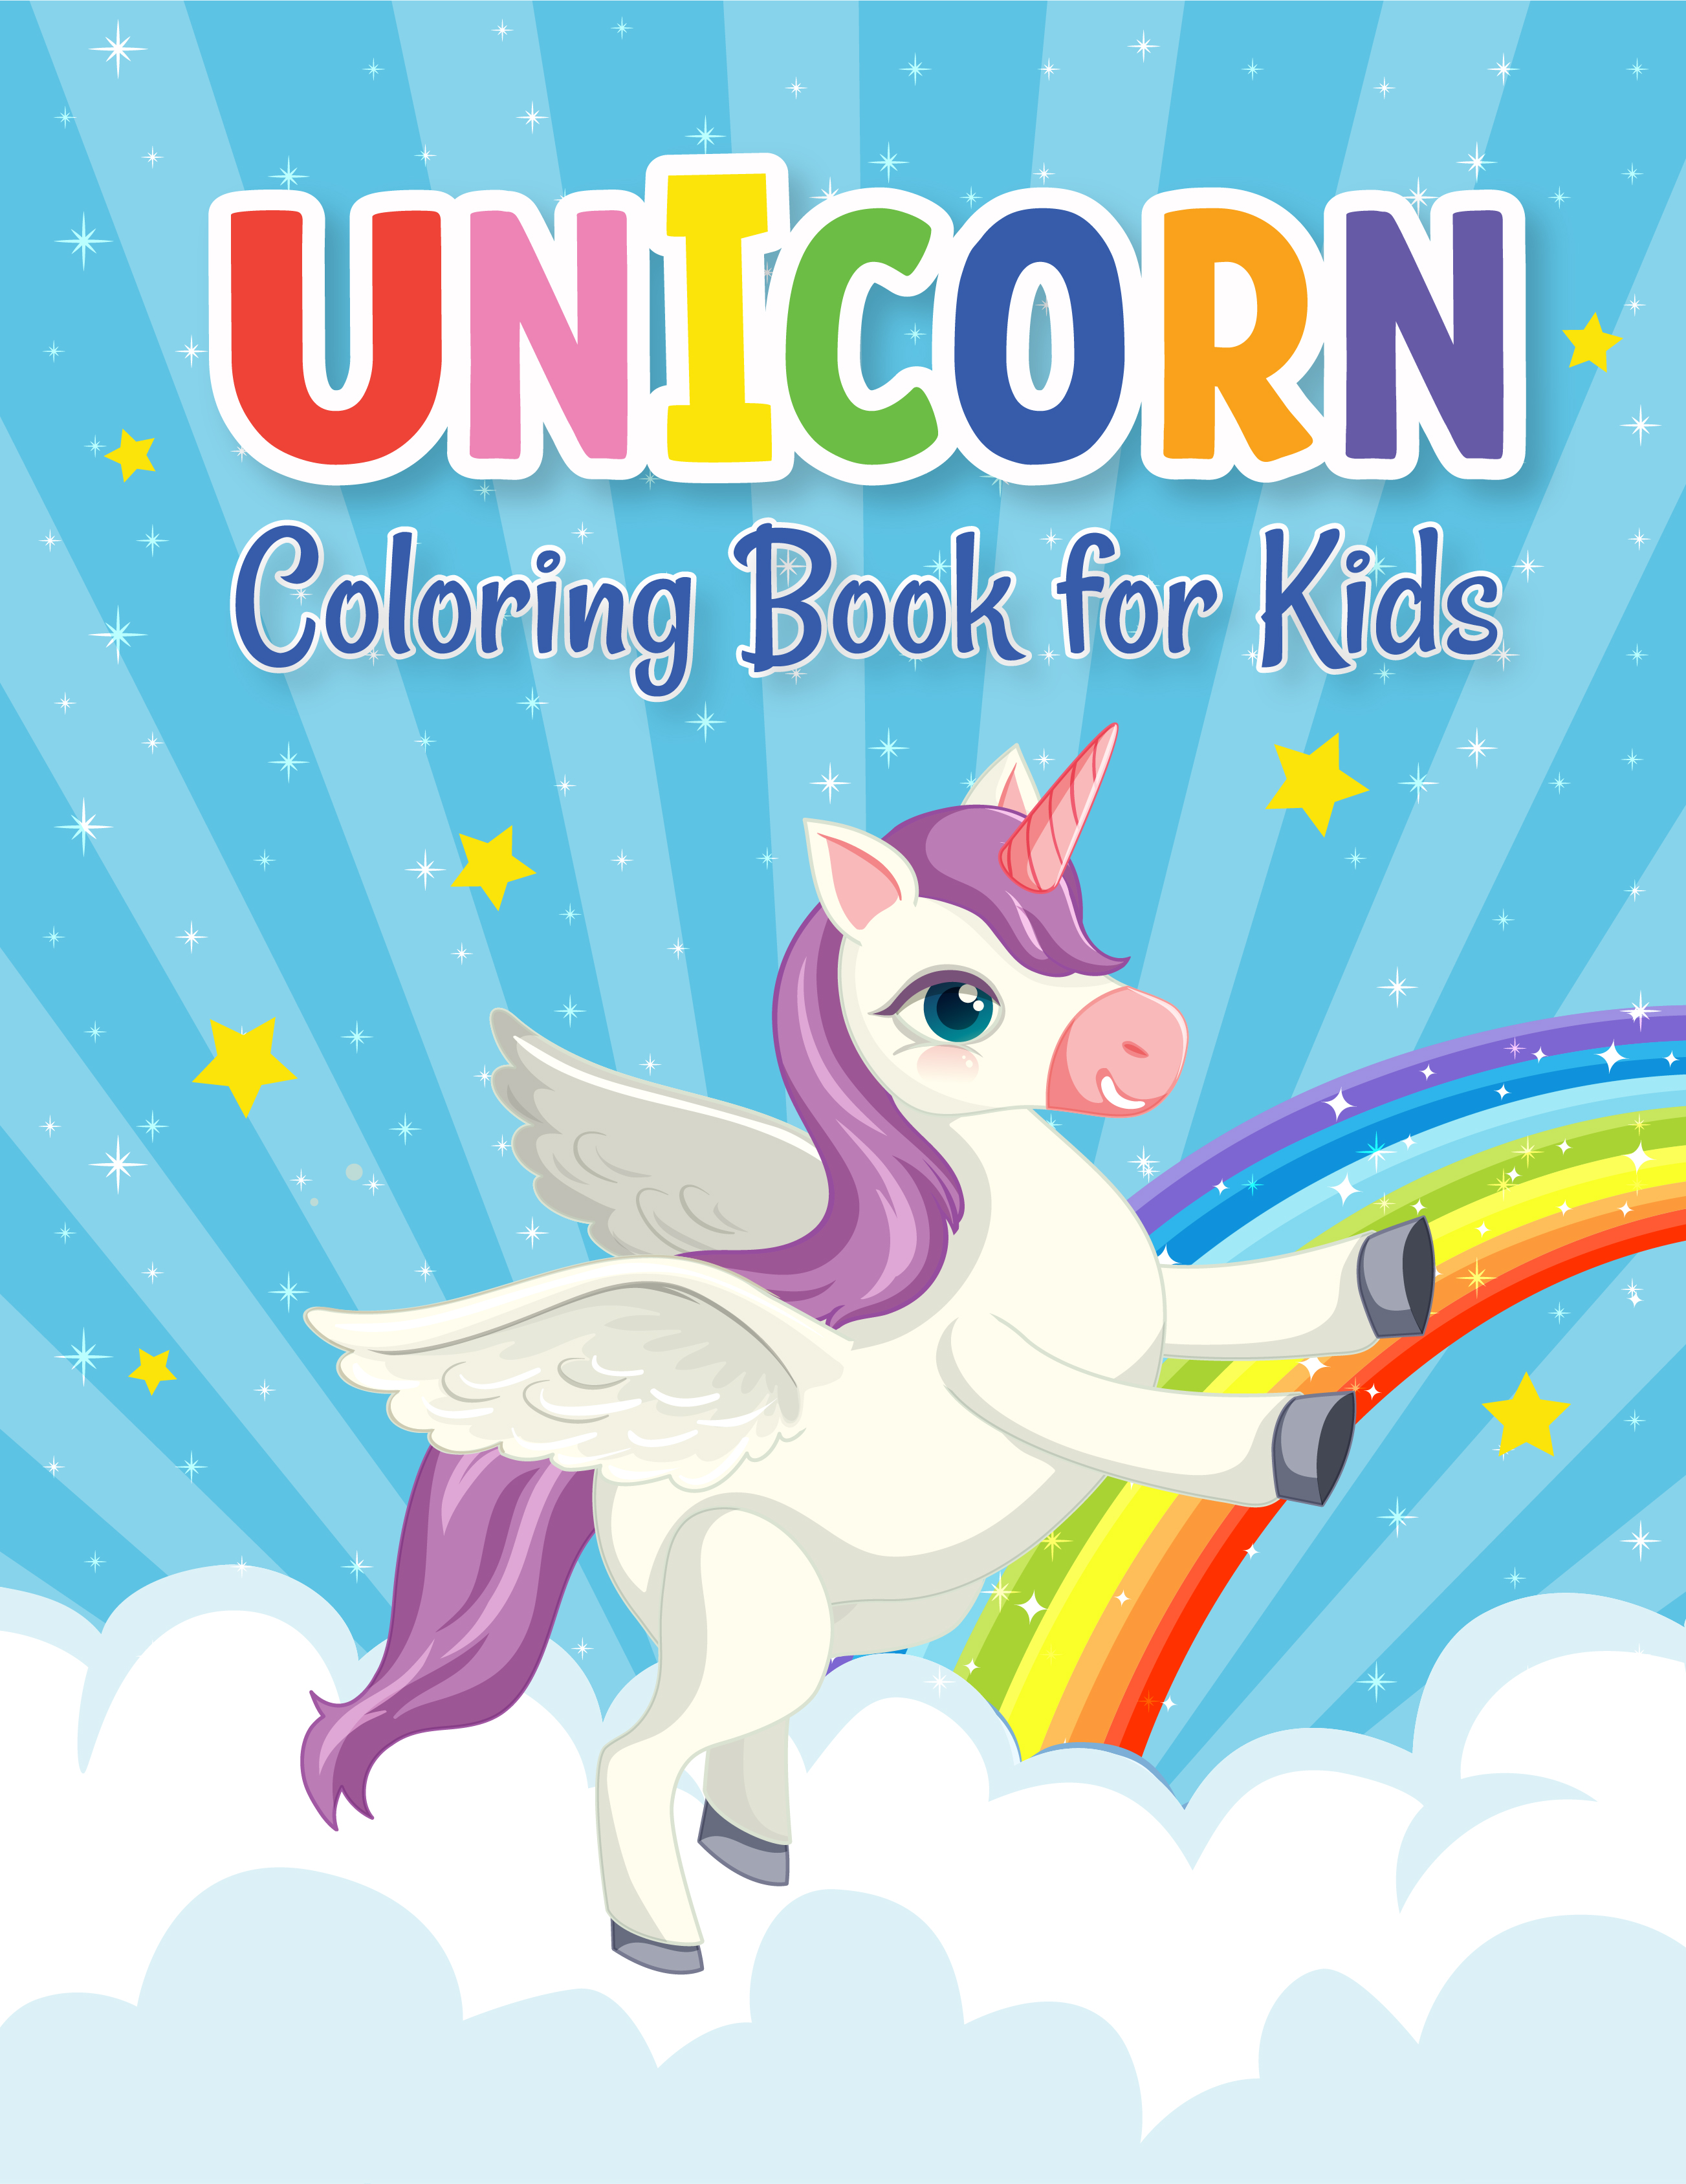 I will do coloring book cover design for your kdp business